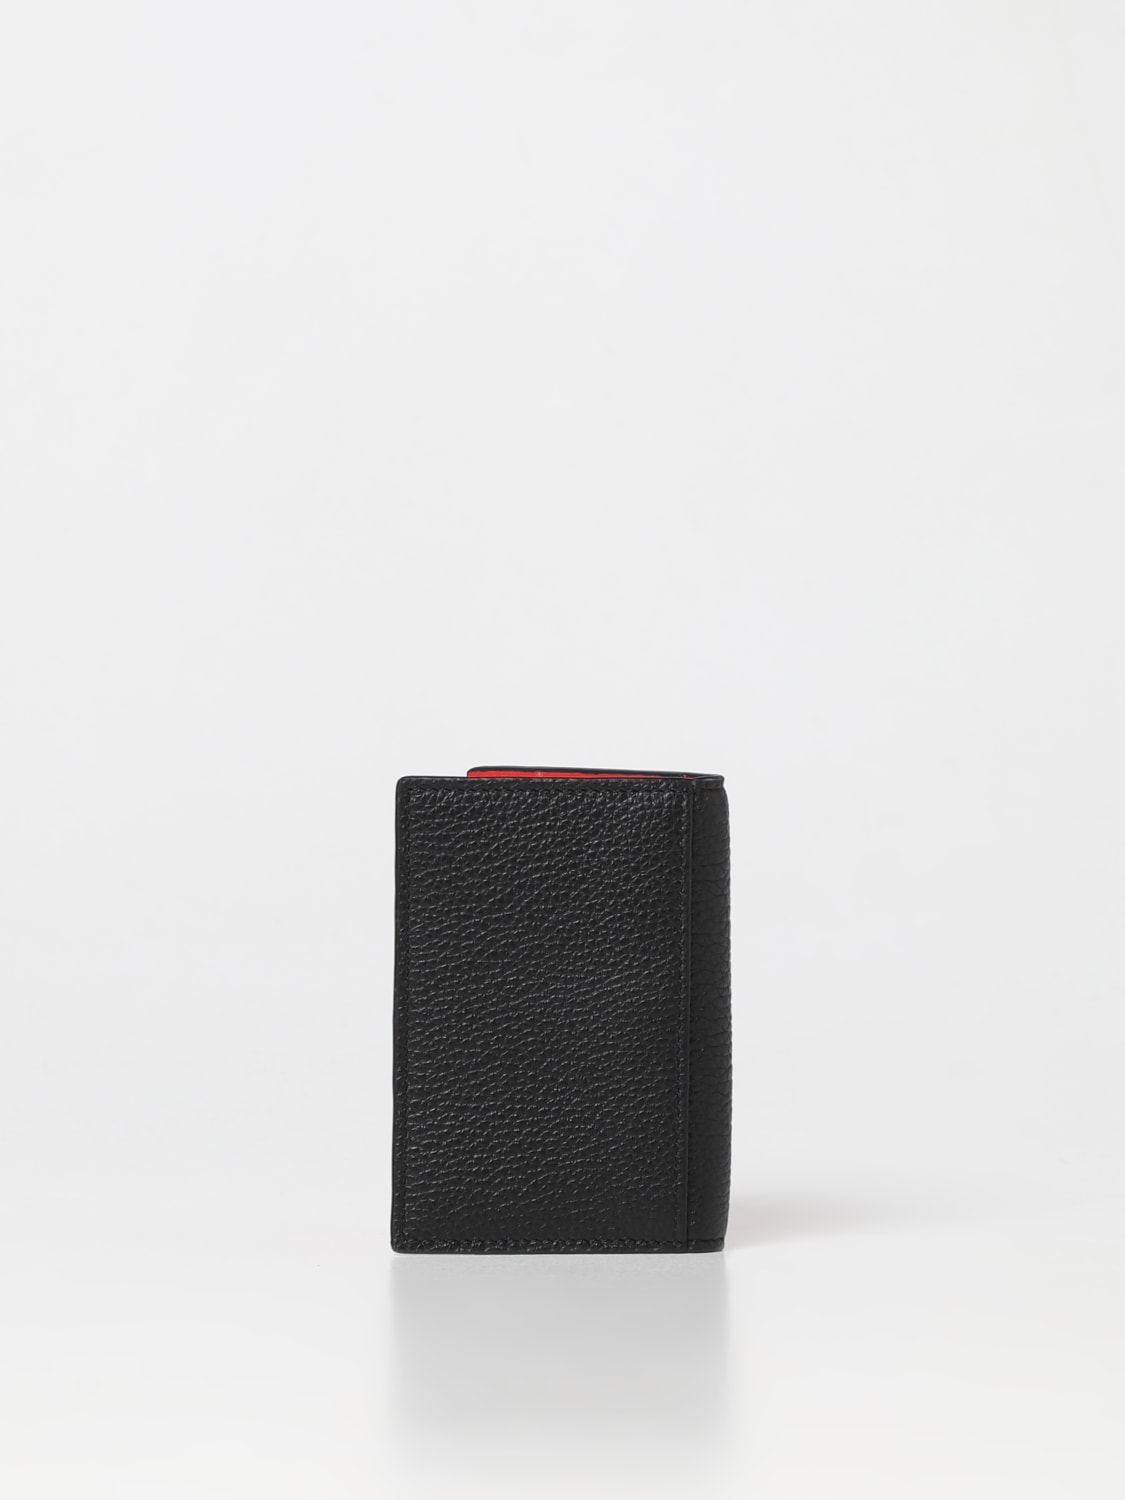 LOUBOUTIN: Sifnos credit card holder in grained leather - Black | Christian Louboutin wallet 3195057 online on GIGLIO.COM